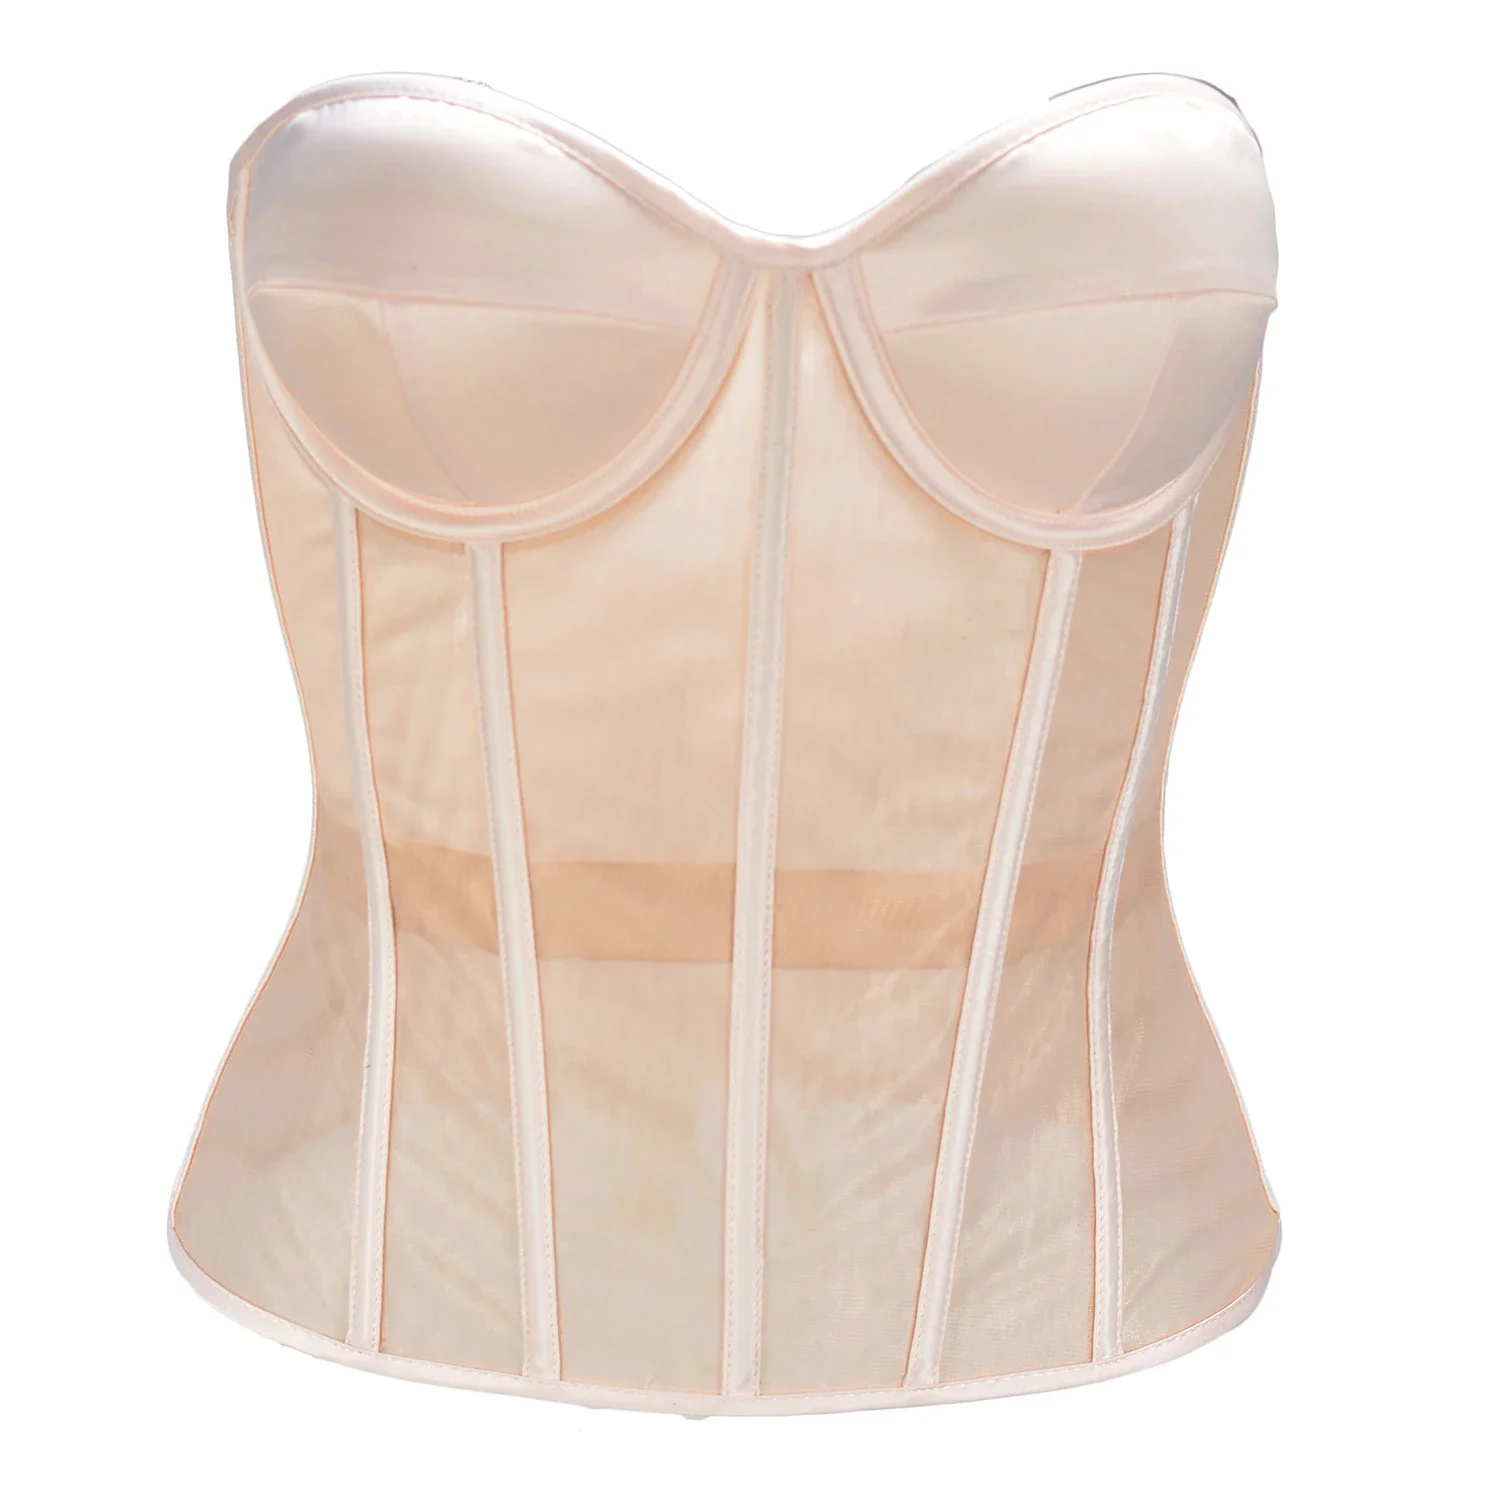 

Abdominal Corset Double Layer Transparent Mesh Breathable Bustiers With Bra Lace Up Bones Bodices Beige Corselet